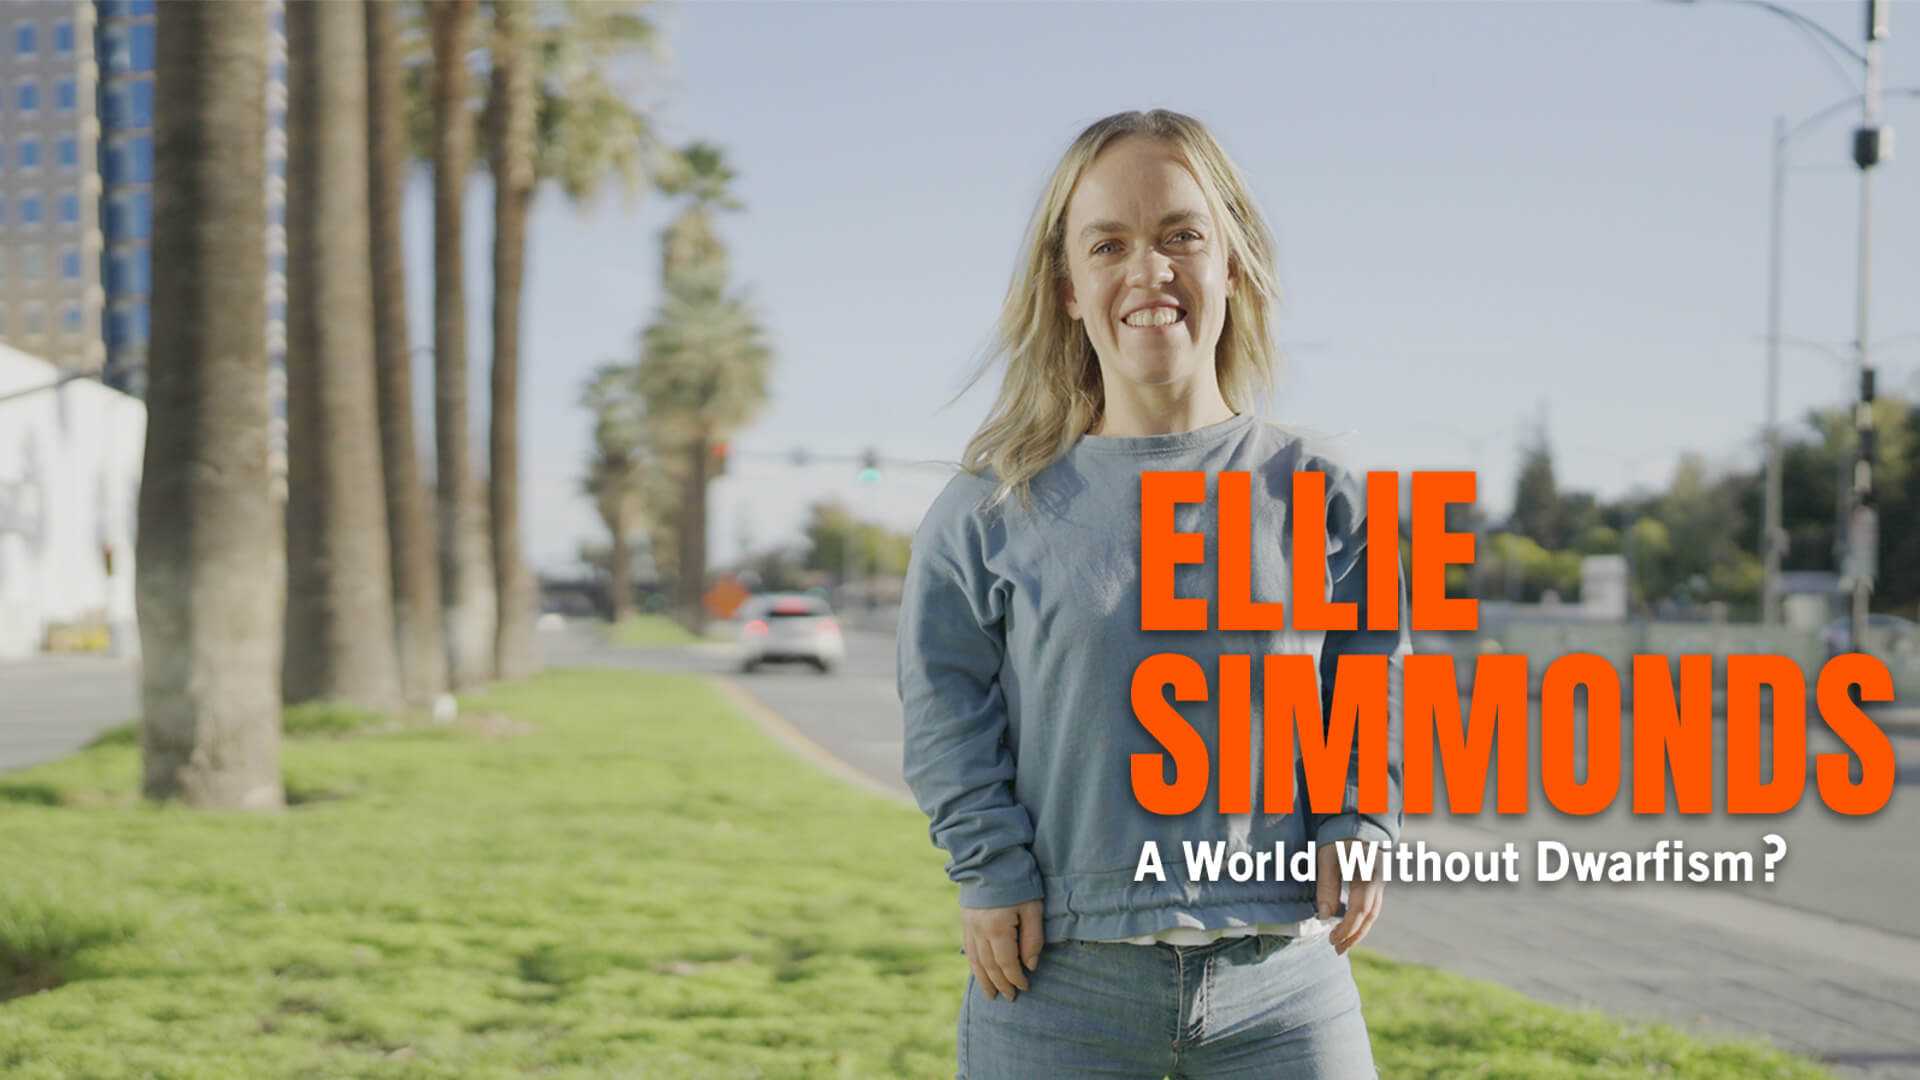 Paralympian Ellie Simmonds, who has dwarfism, stands on a palm tree lined boulevard facing the camera with a big smile.